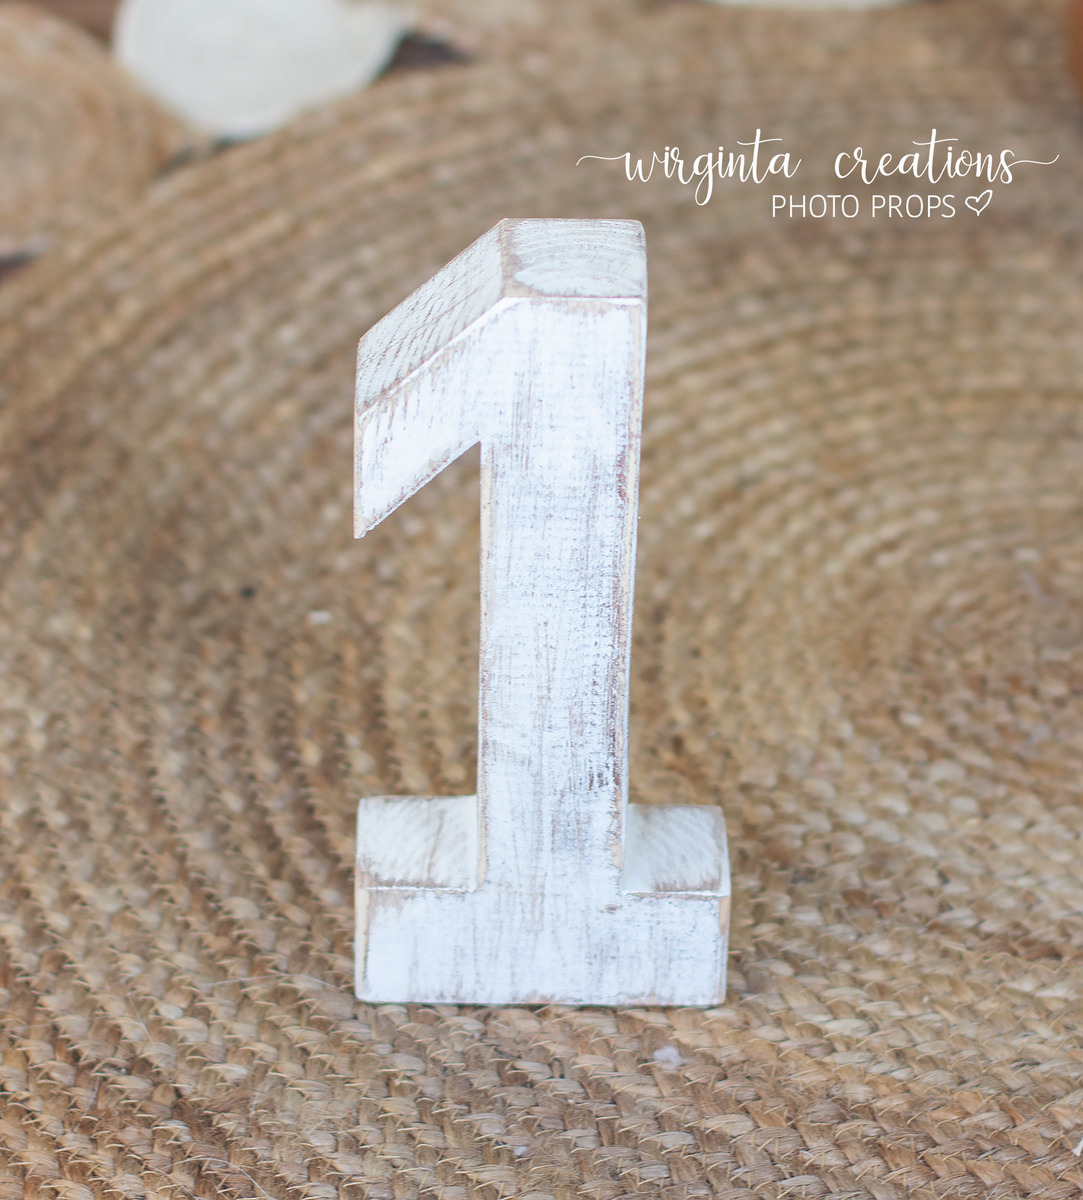 Wooden Number 1 | Unfinished Wooden Numbers | Wooden Props